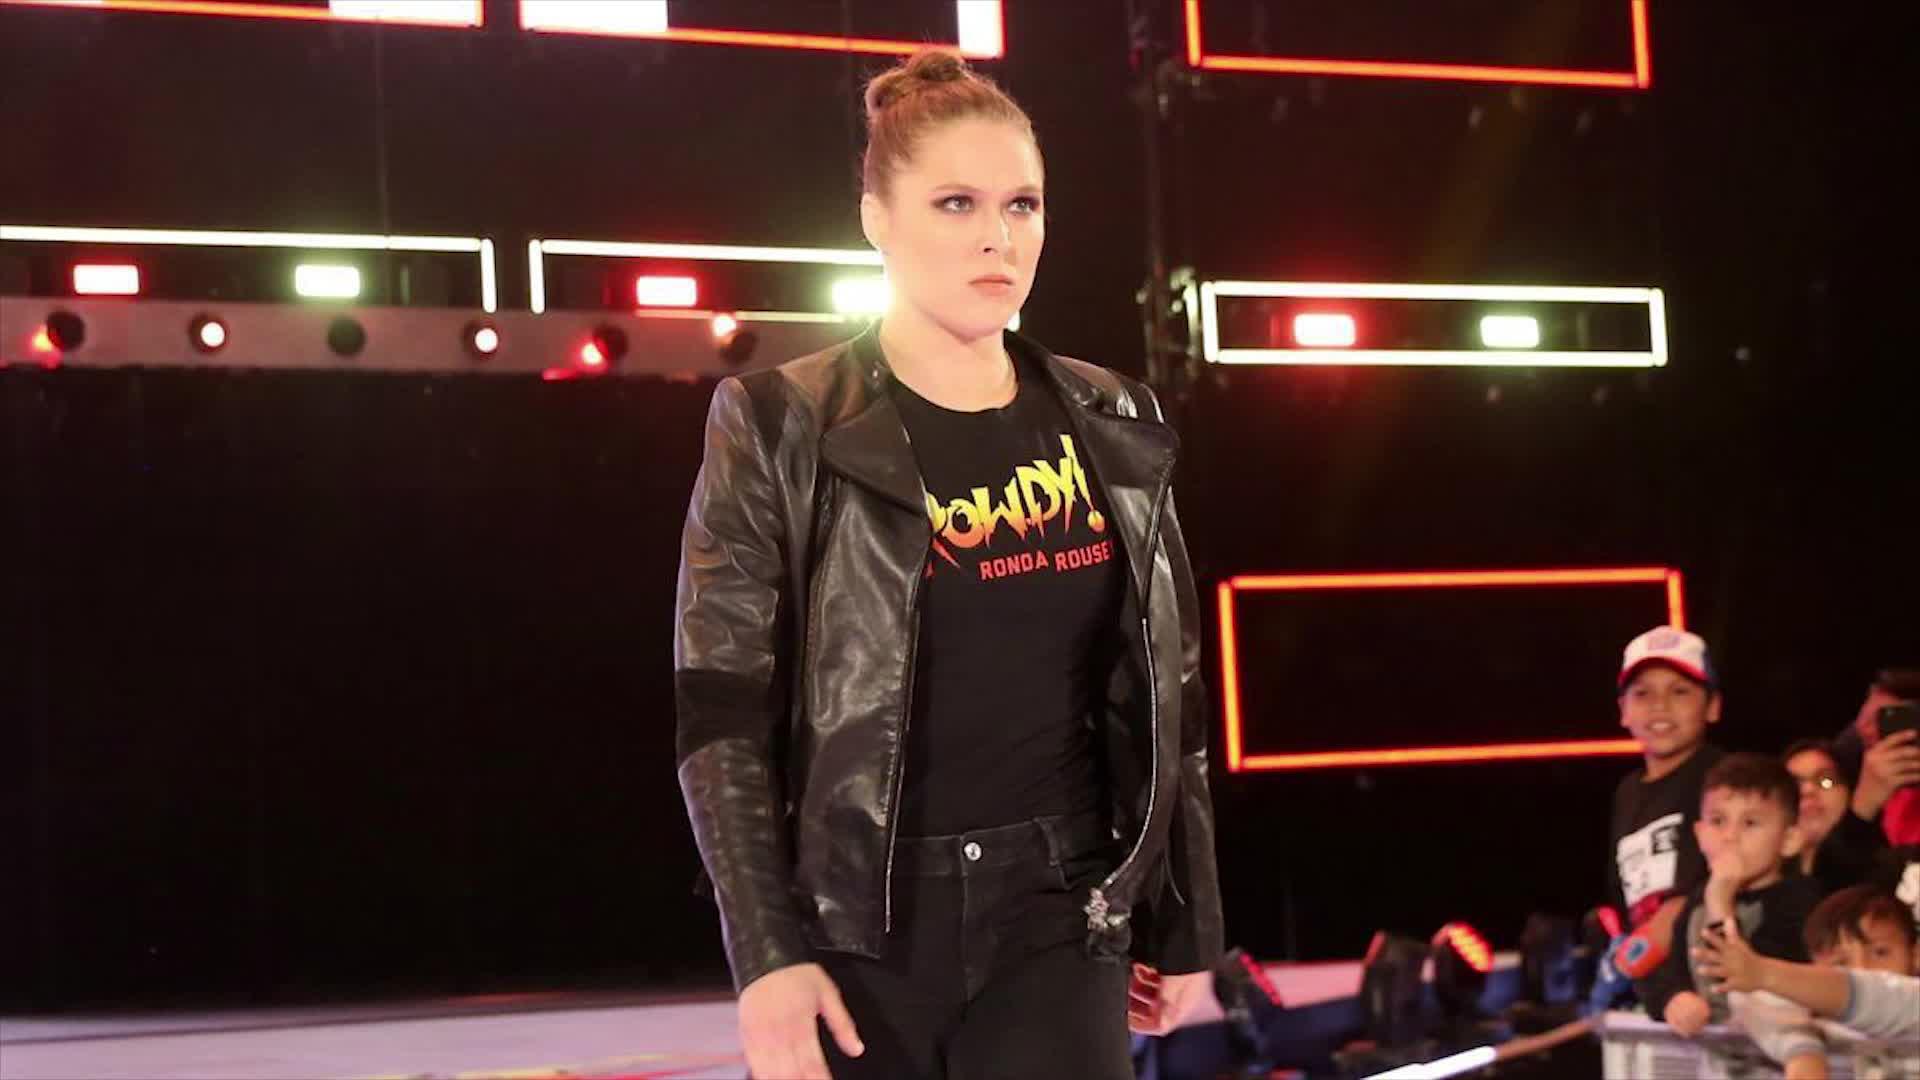 Ronda Rousey on life in WWE: 'I haven't been this happy since my